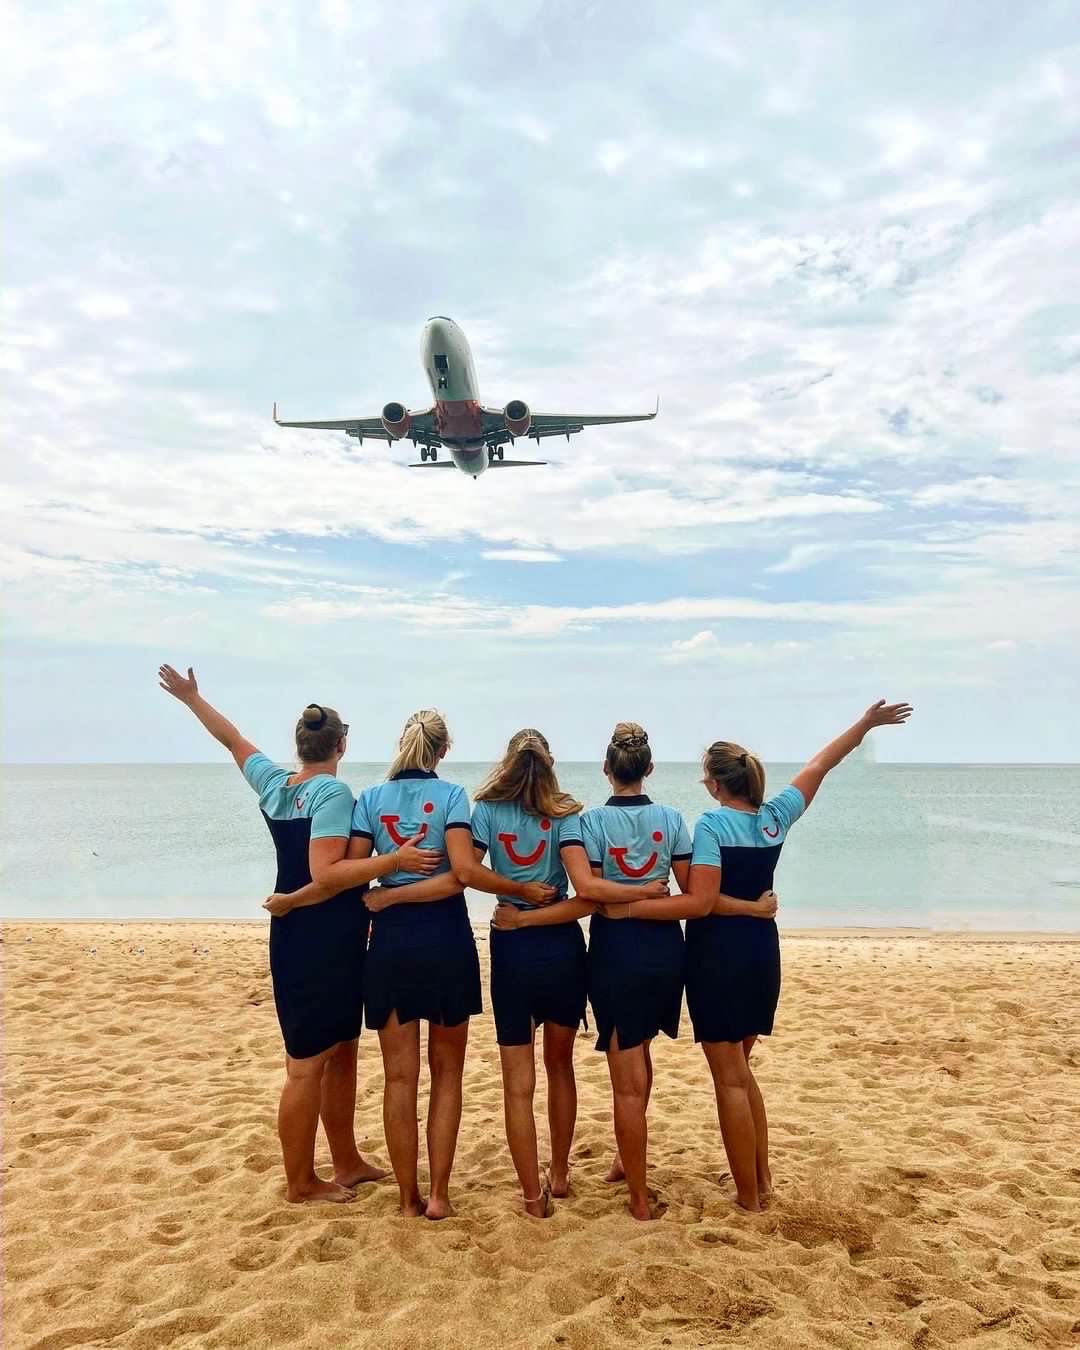 TUI Reps on a beach arm in arm waving at a plane about to go overhead.